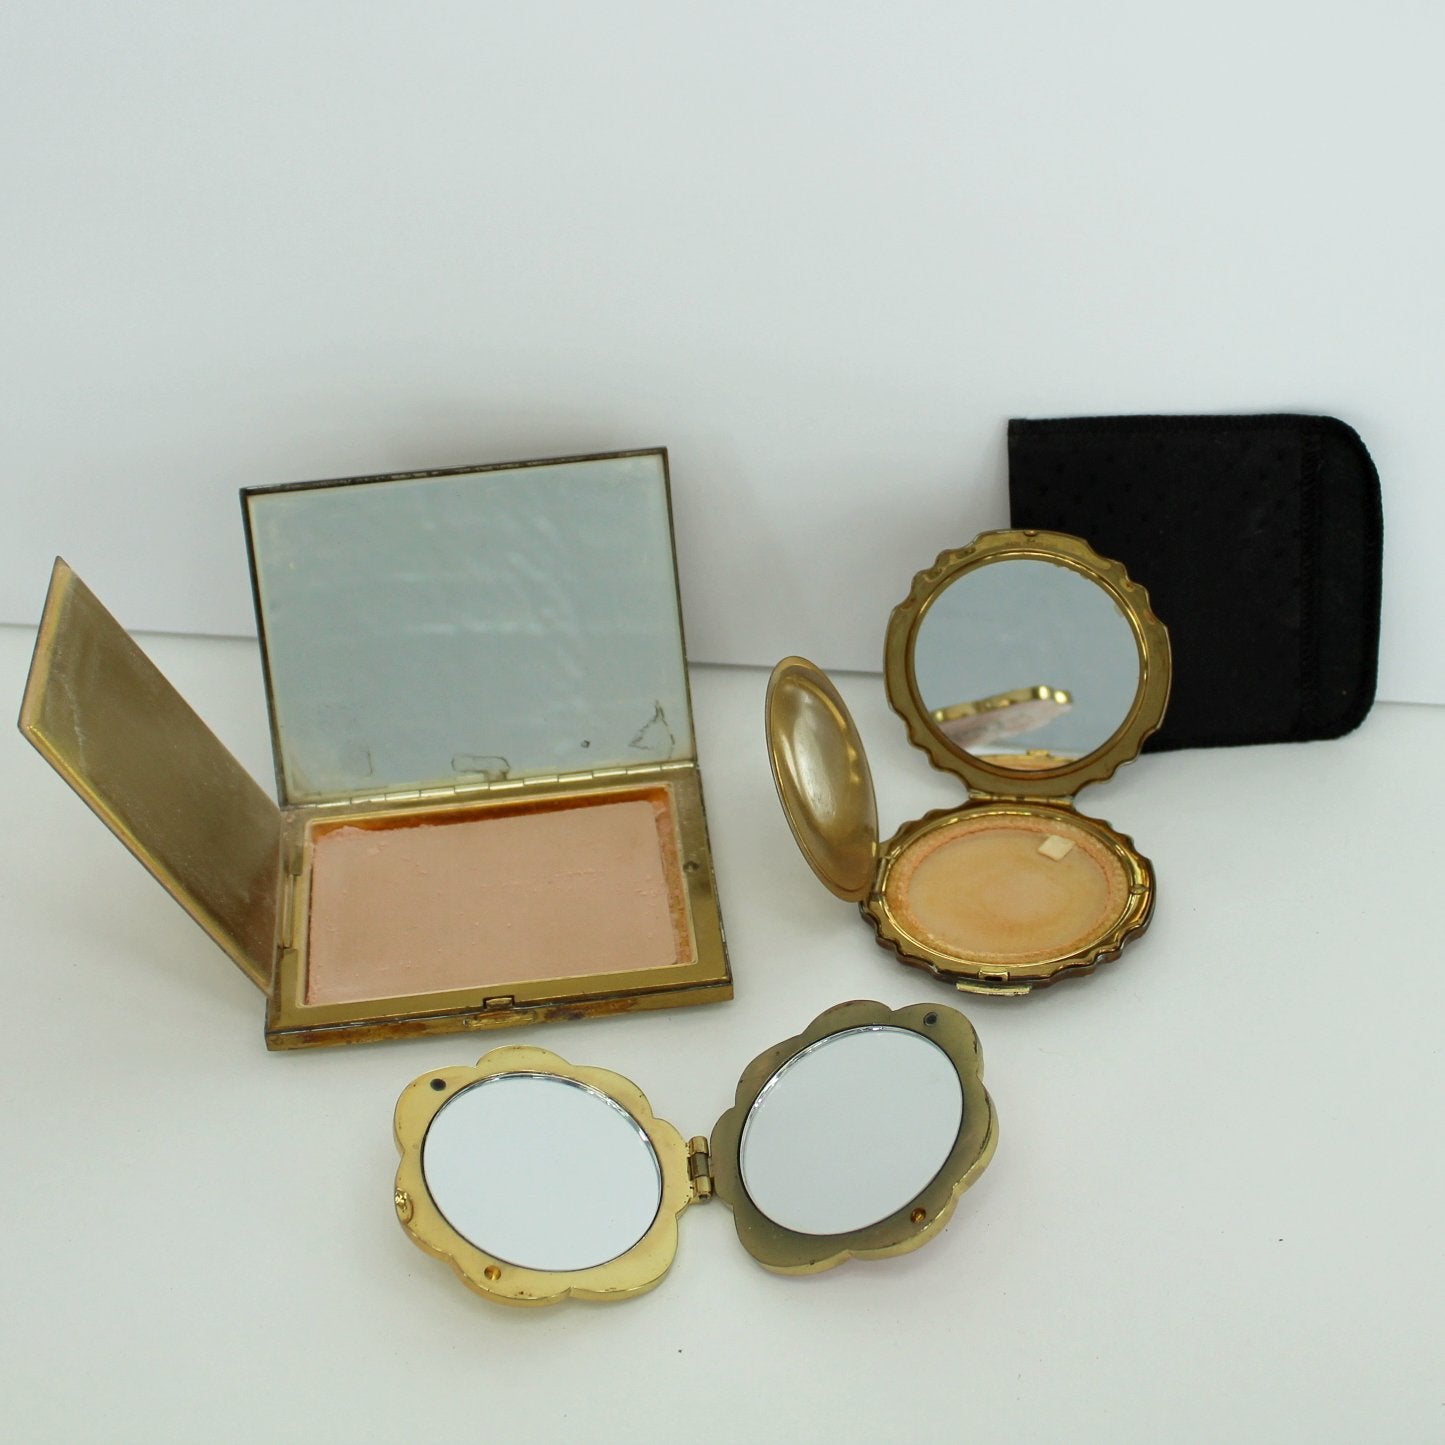 Collection Mid Century Vanity Grooming Unique Items Stratton TrueArt Noble Lady compacts inside